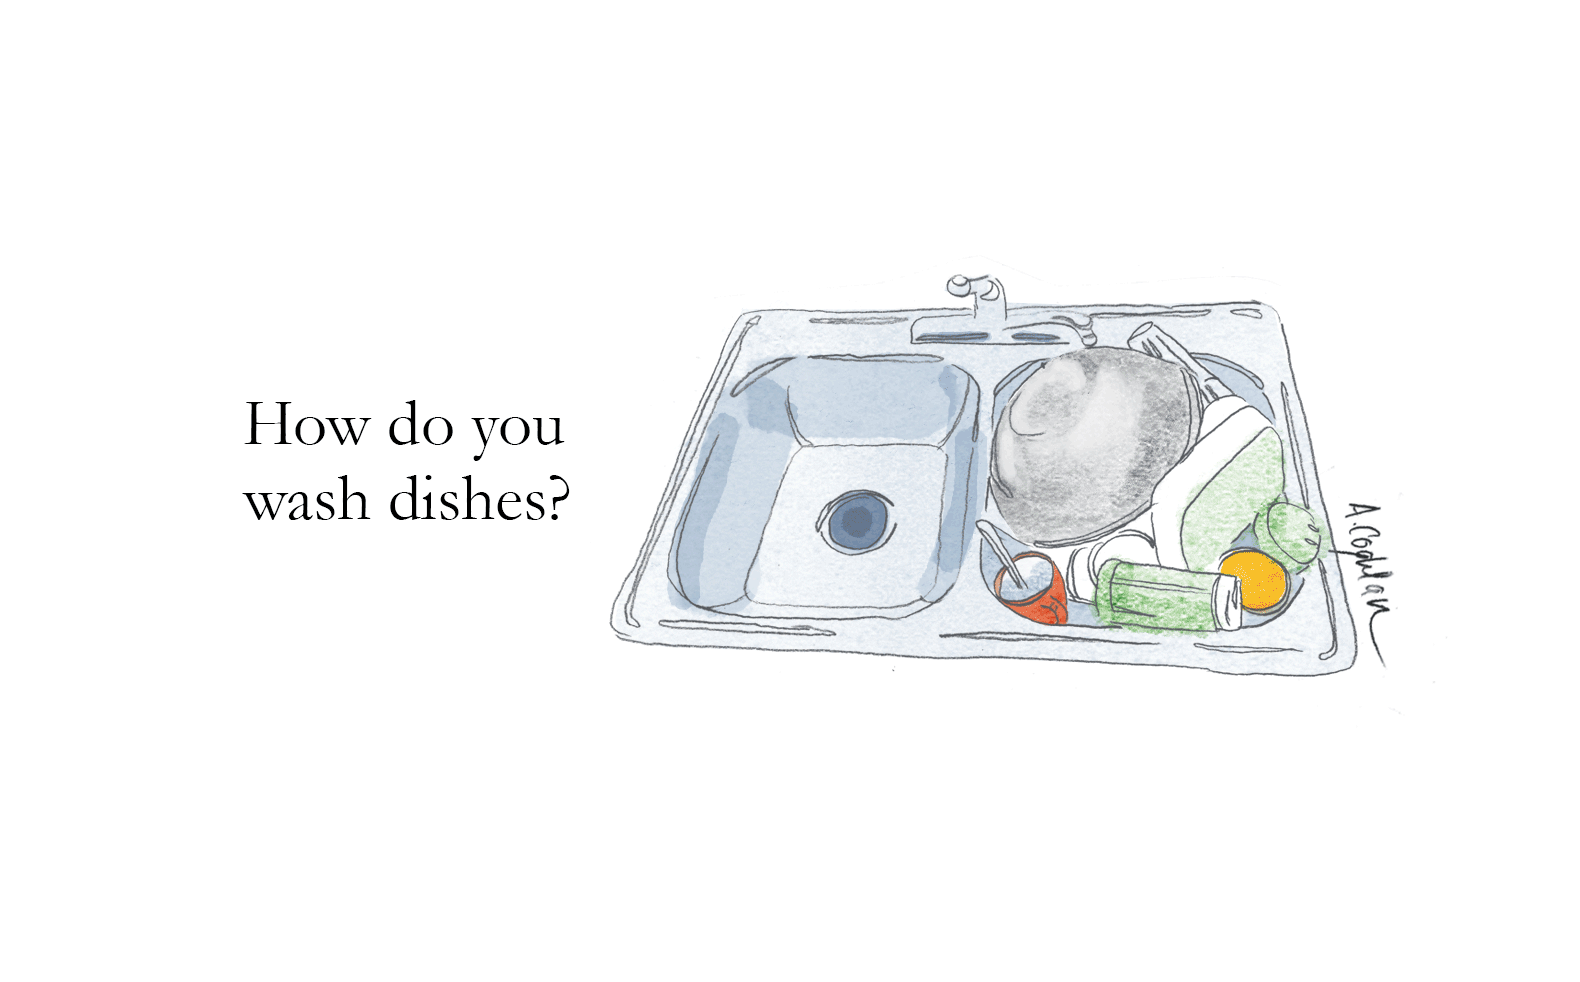 An illustration of a sink full of dishes accompanied by text asking “How do you wash dishes?”